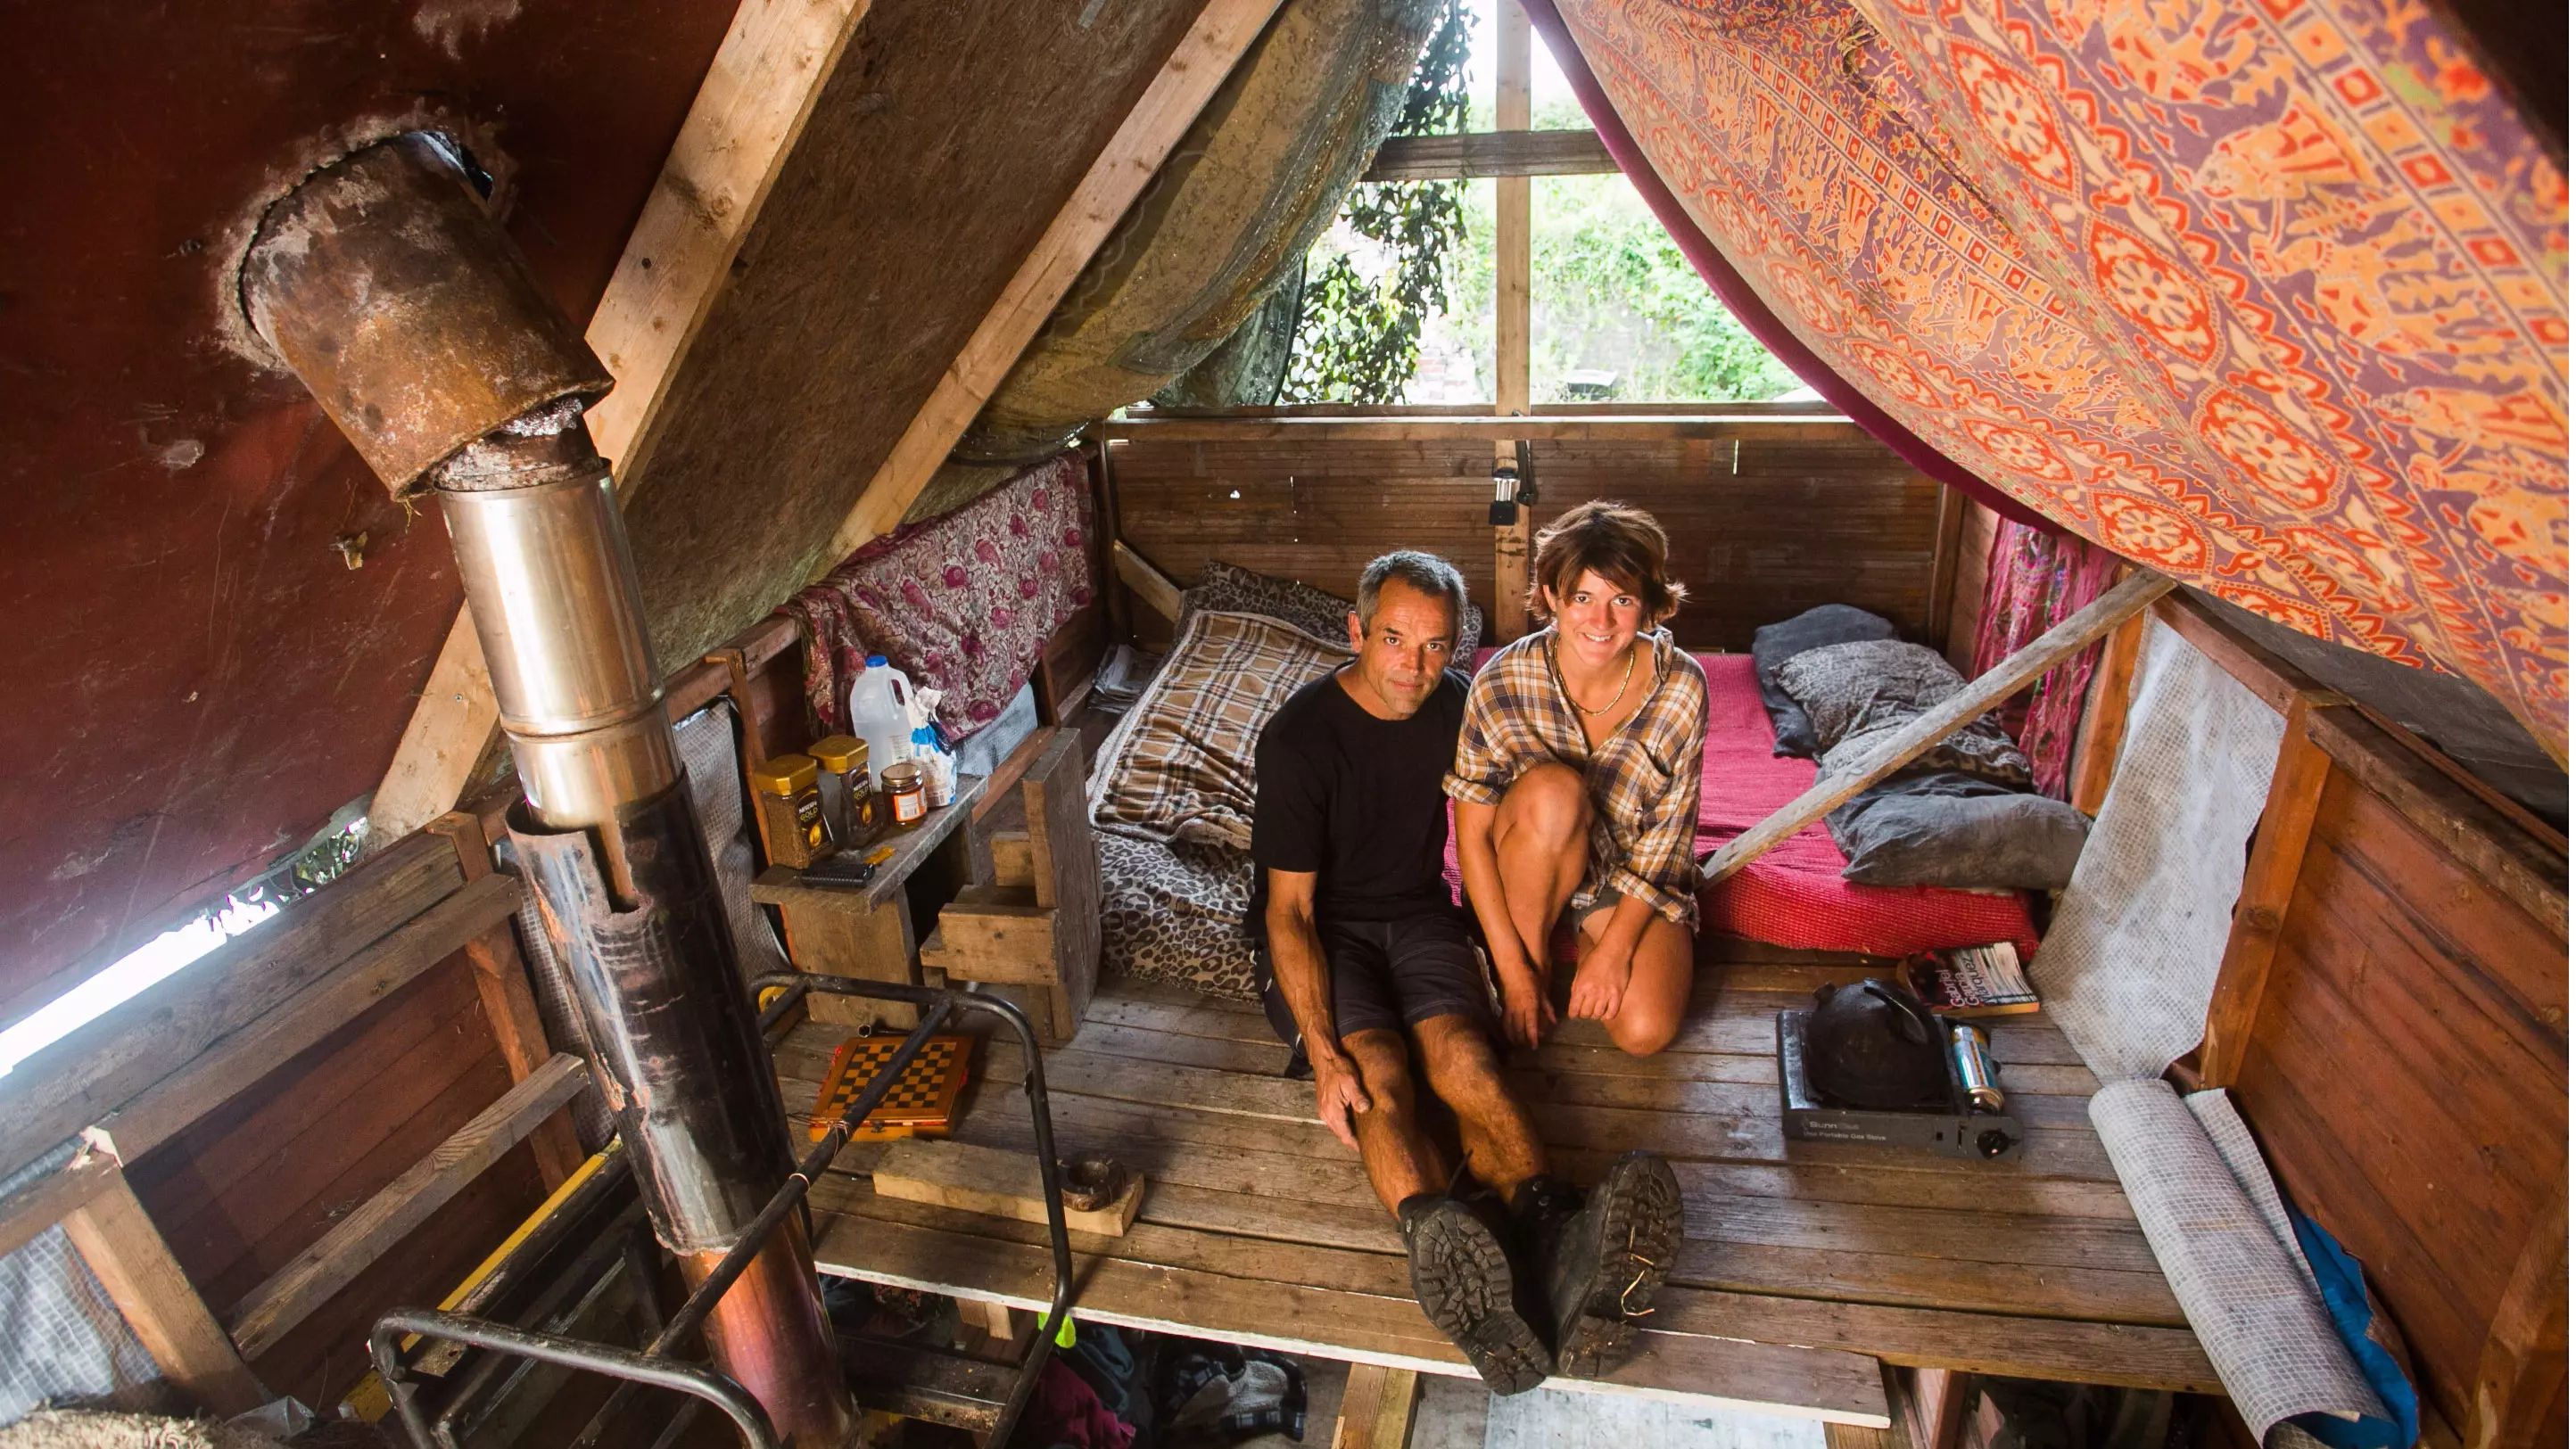 Cornwall Couple Live In Makeshift Hut On Just £1,250 A Year